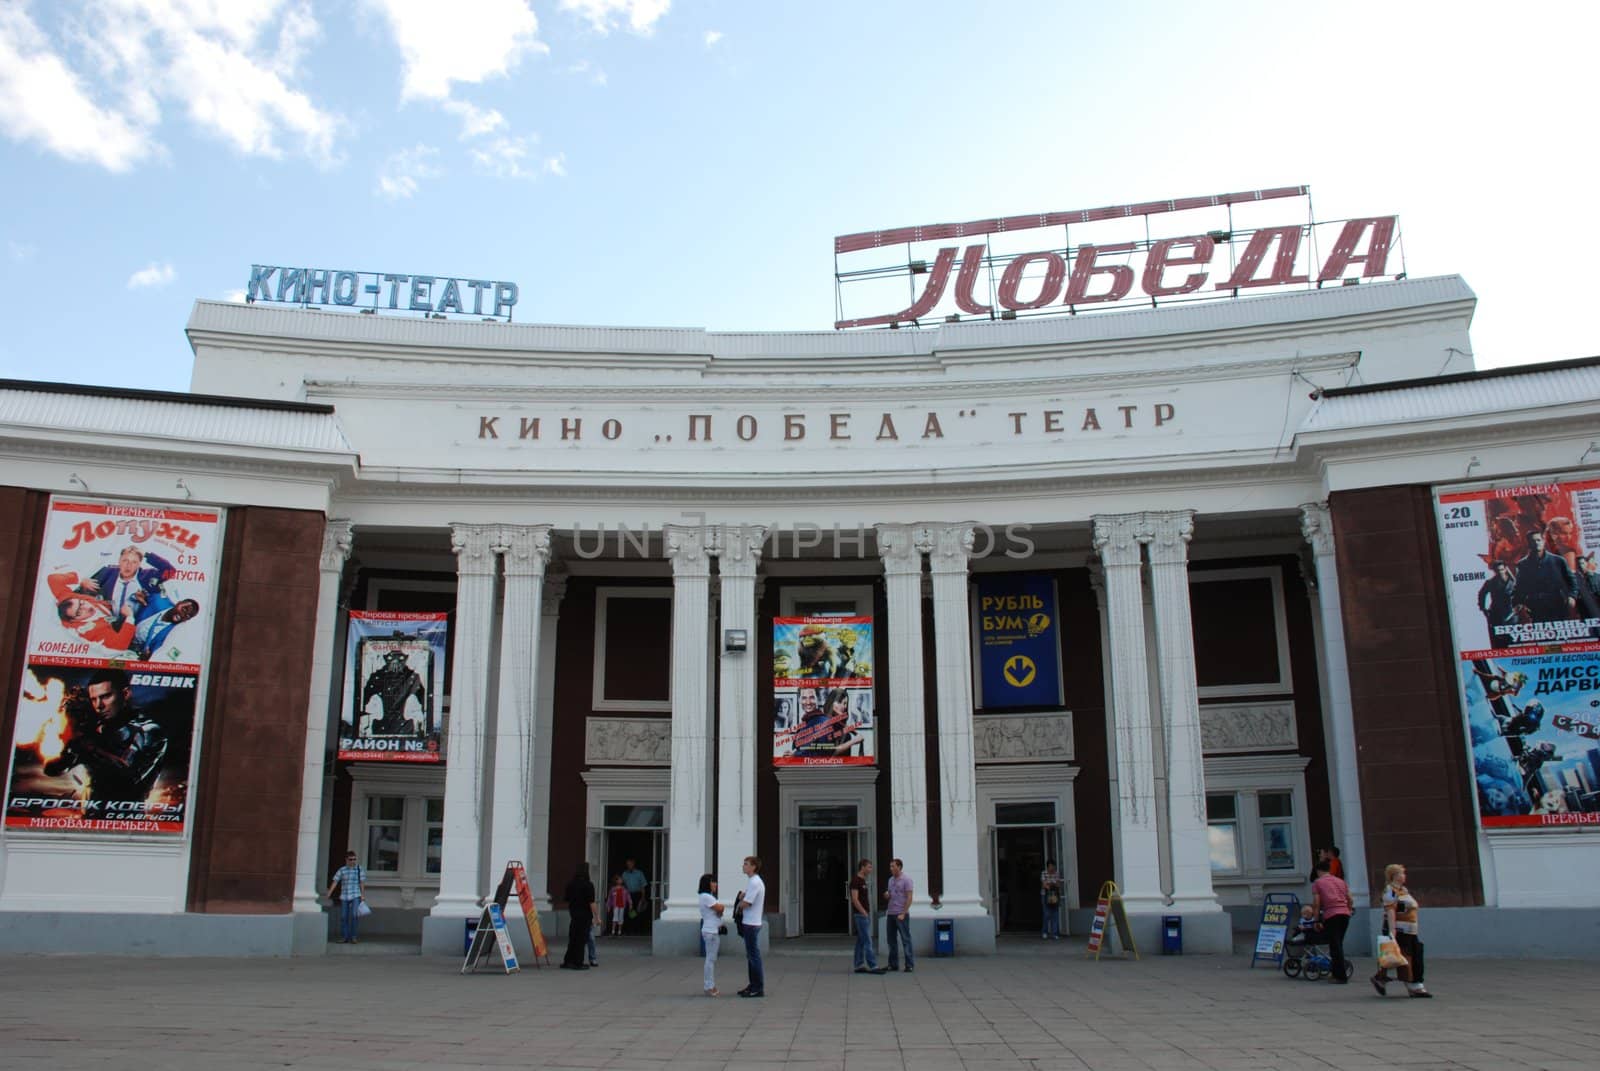 The building of the cinema "Pobeda" ("Victory")